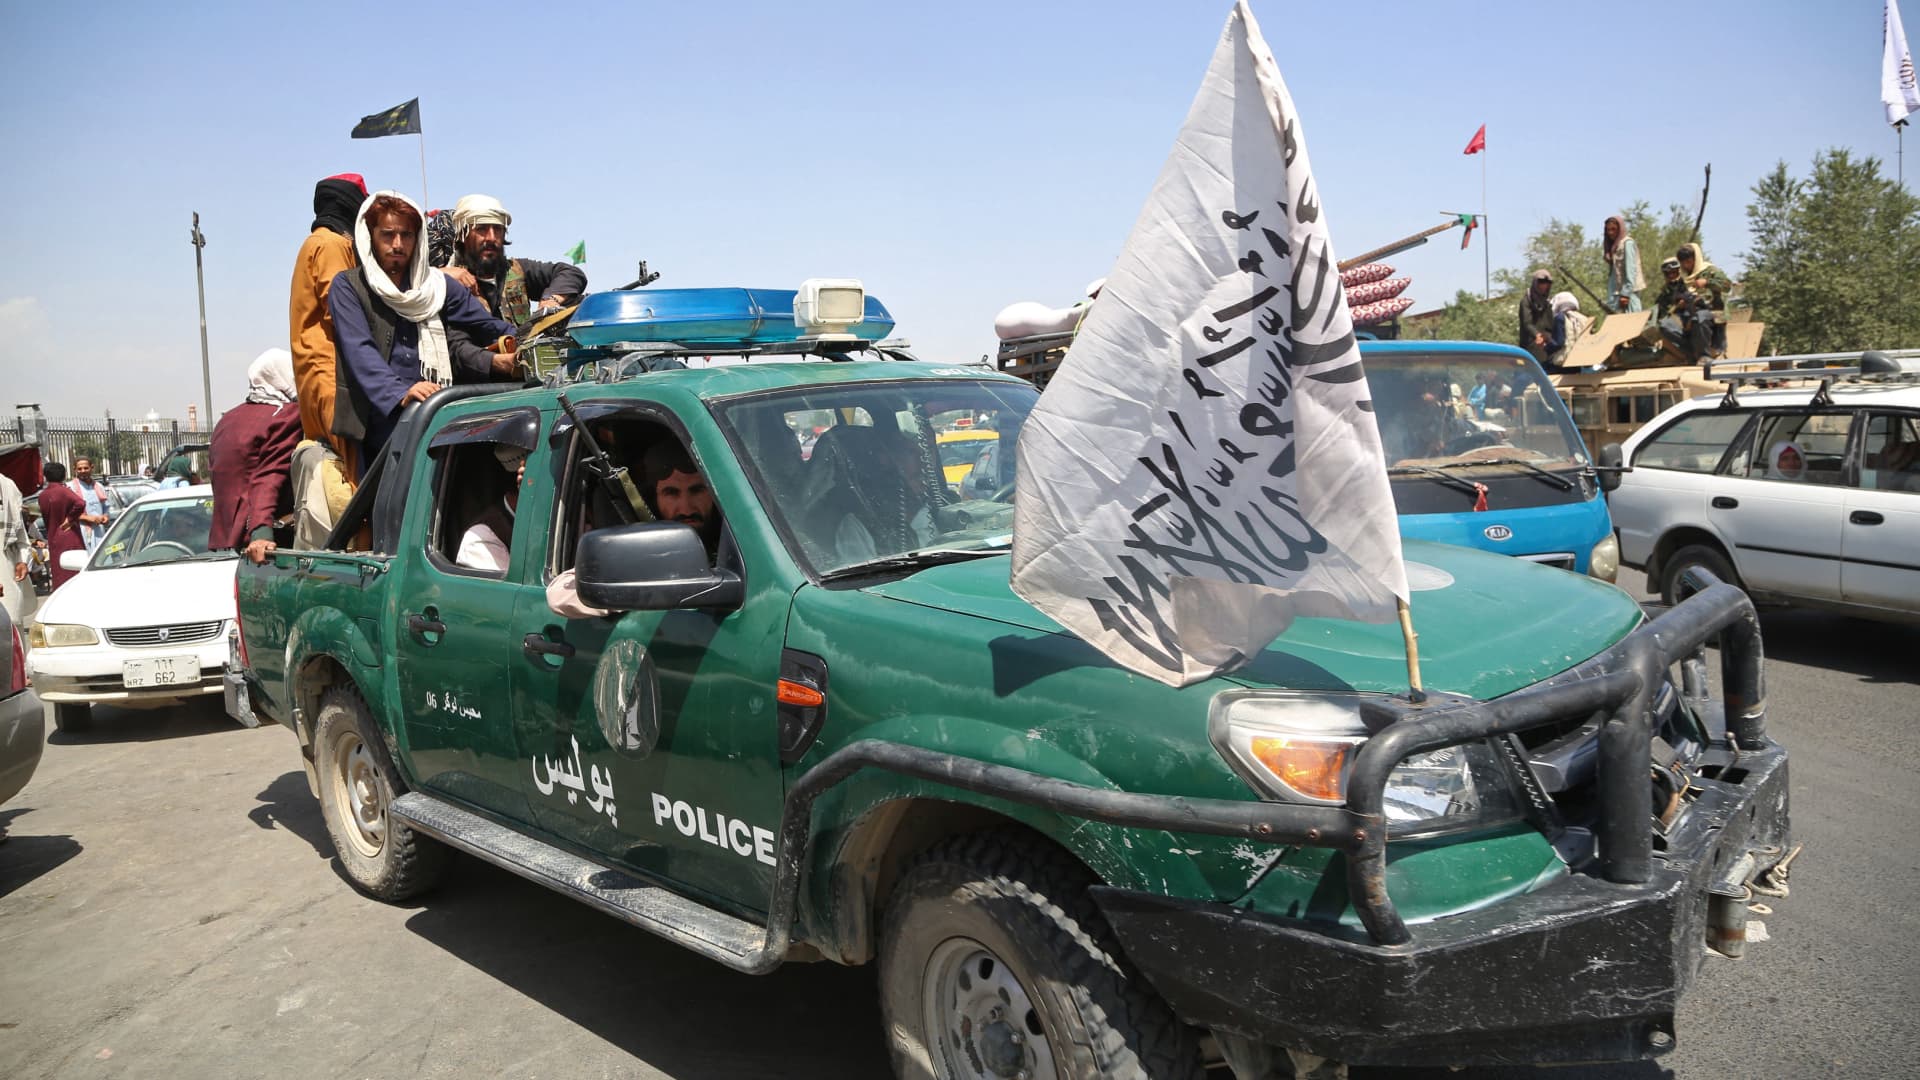 Taliban fighters patrol the streets of Kabul on August 16, 2021, after a stunningly swift end to Afghanistan's 20-year war, as thousands of people mobbed the city's airport trying to flee the group's feared hardline brand of Islamist rule.